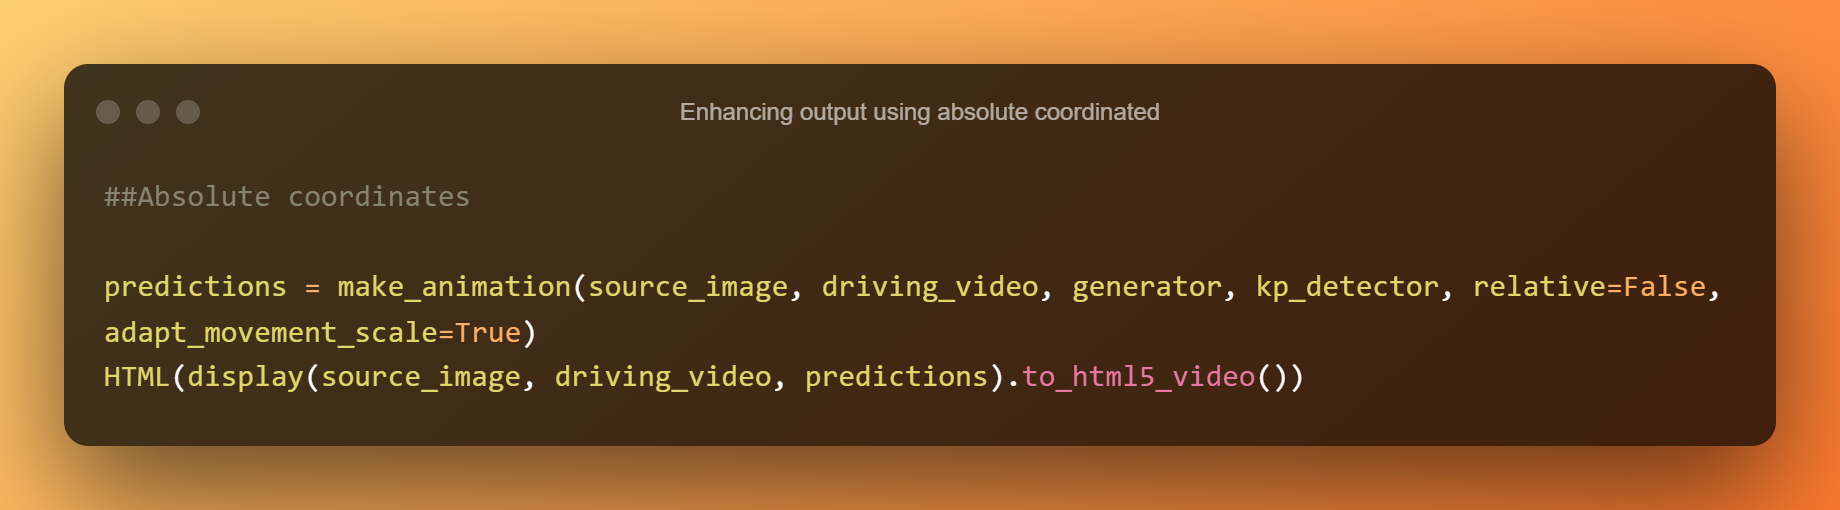 Enhancing Output Using Absolute Coordinated